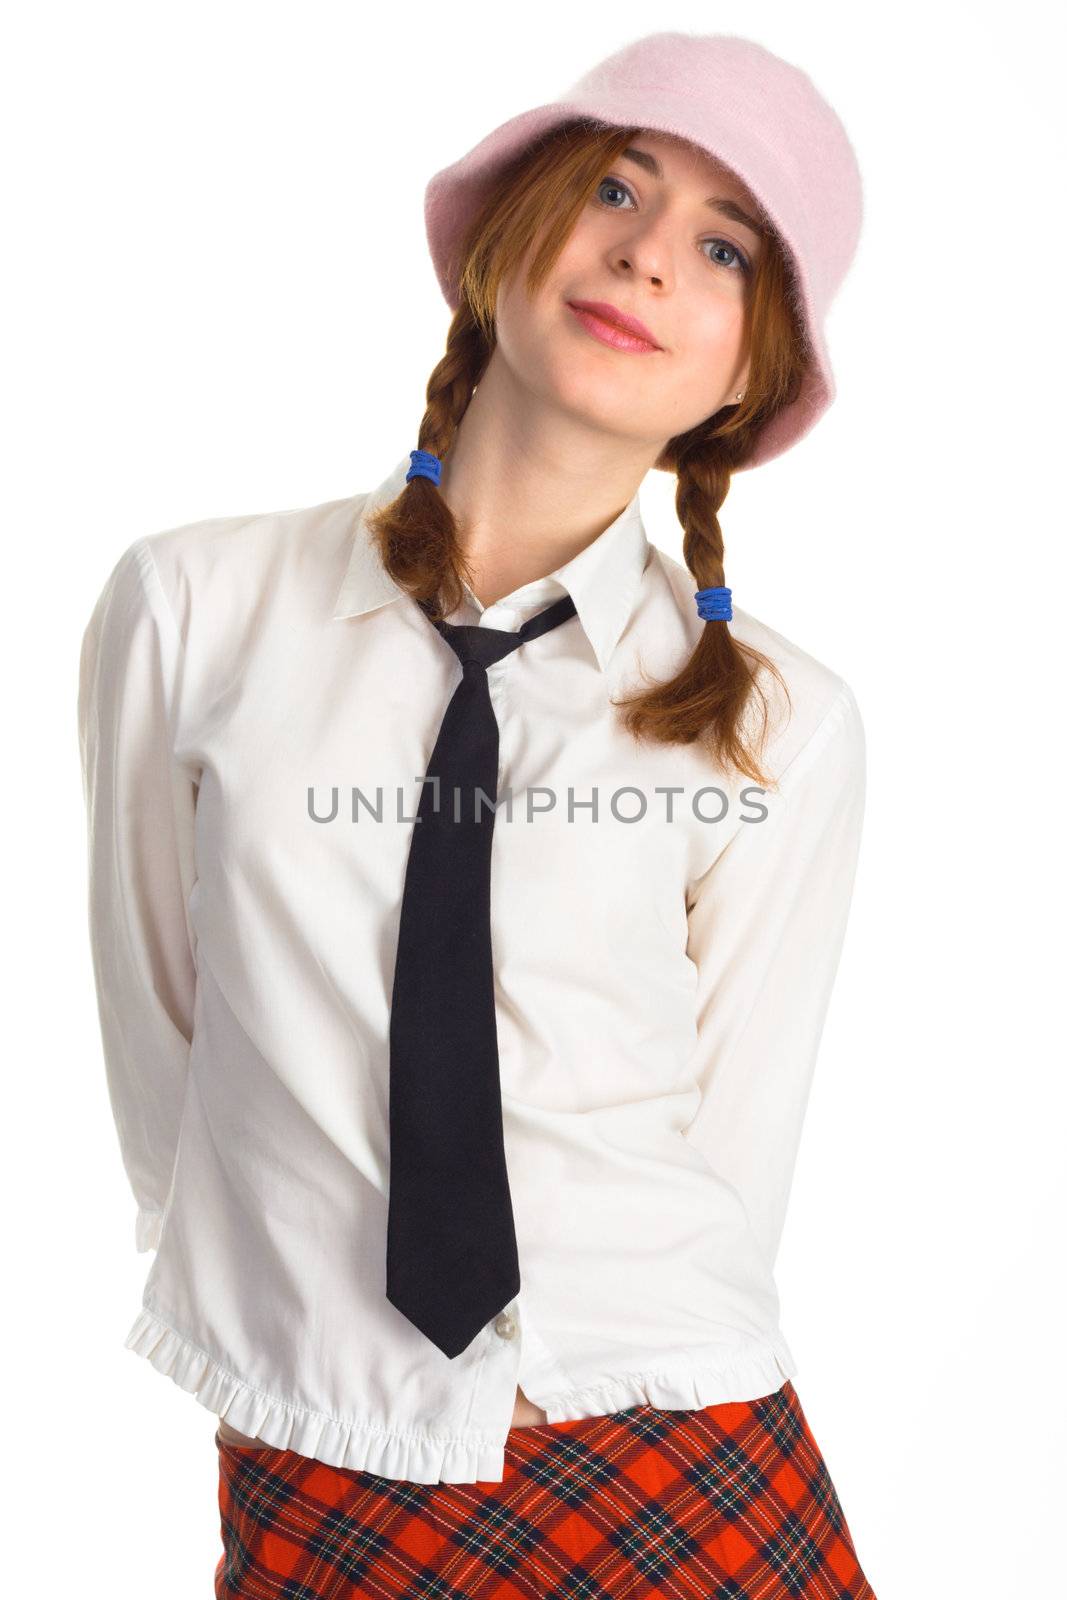 Sexy girl with a tie